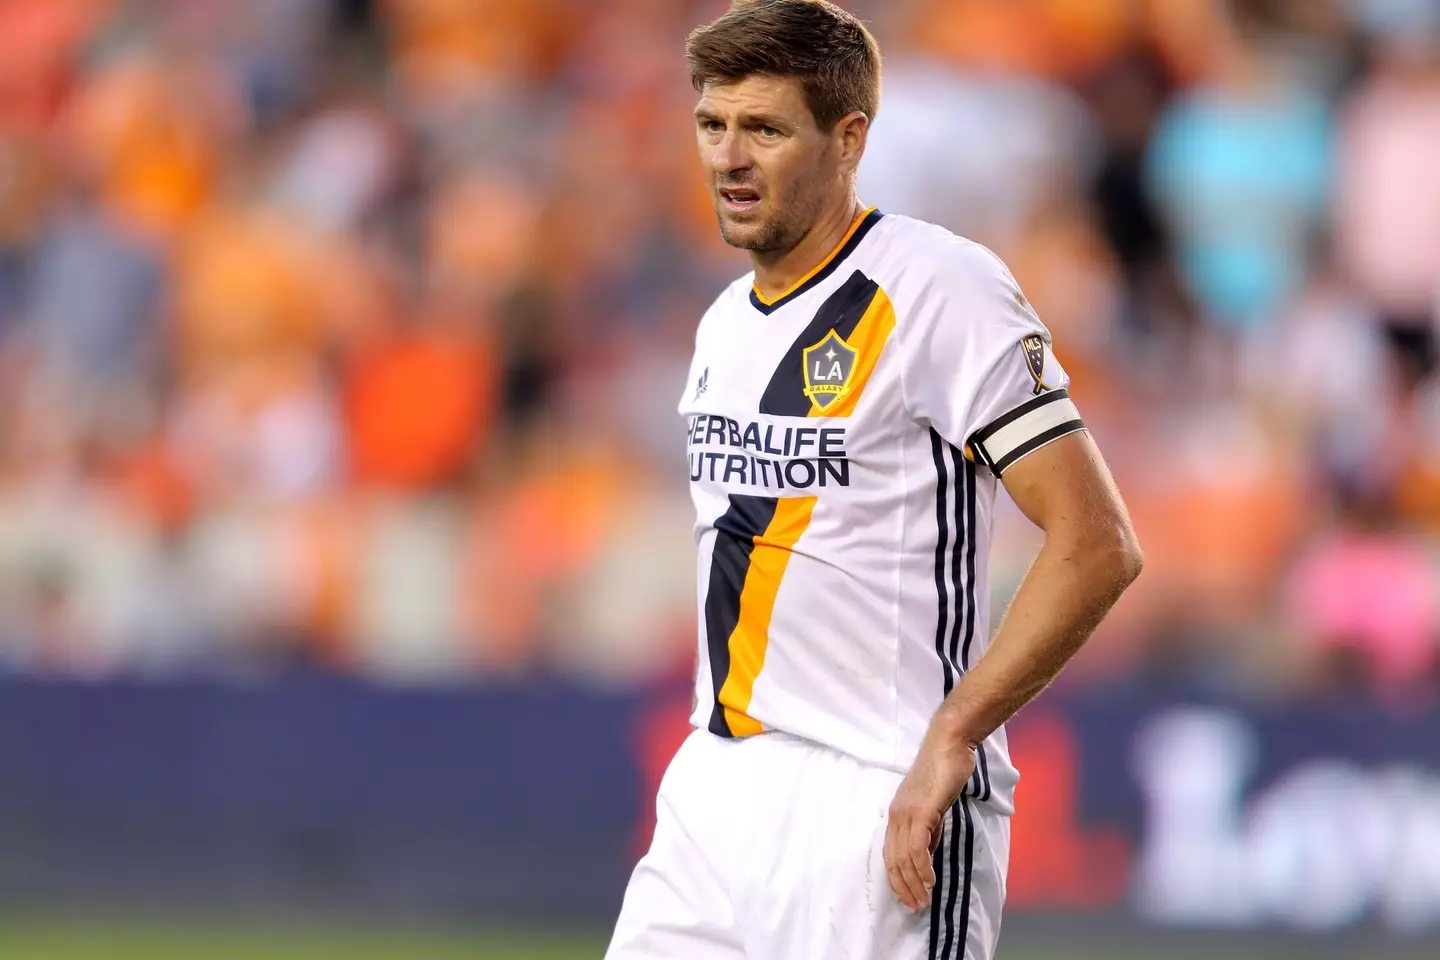 Gerrard move to LA Galaxy after his time in the Premier League was up. Image: Alamy